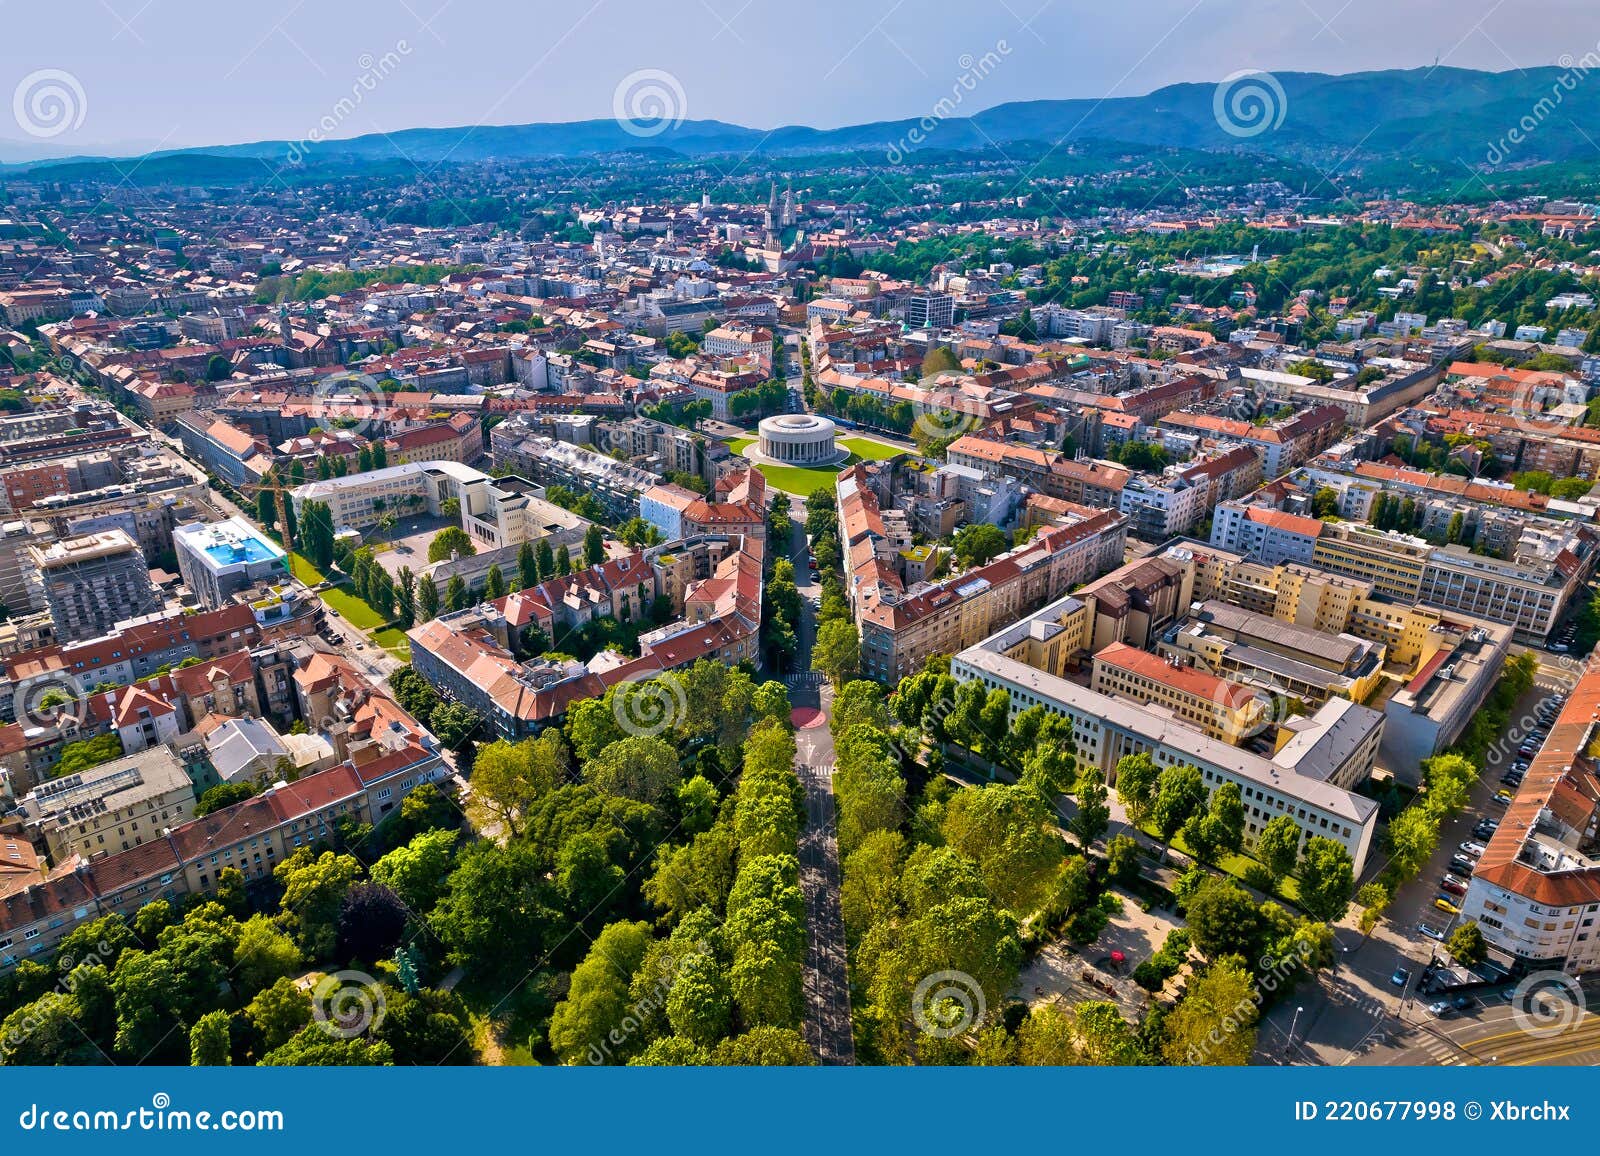 zagreb aerial. the mestrovic pavillion and town of zagreb aerial view